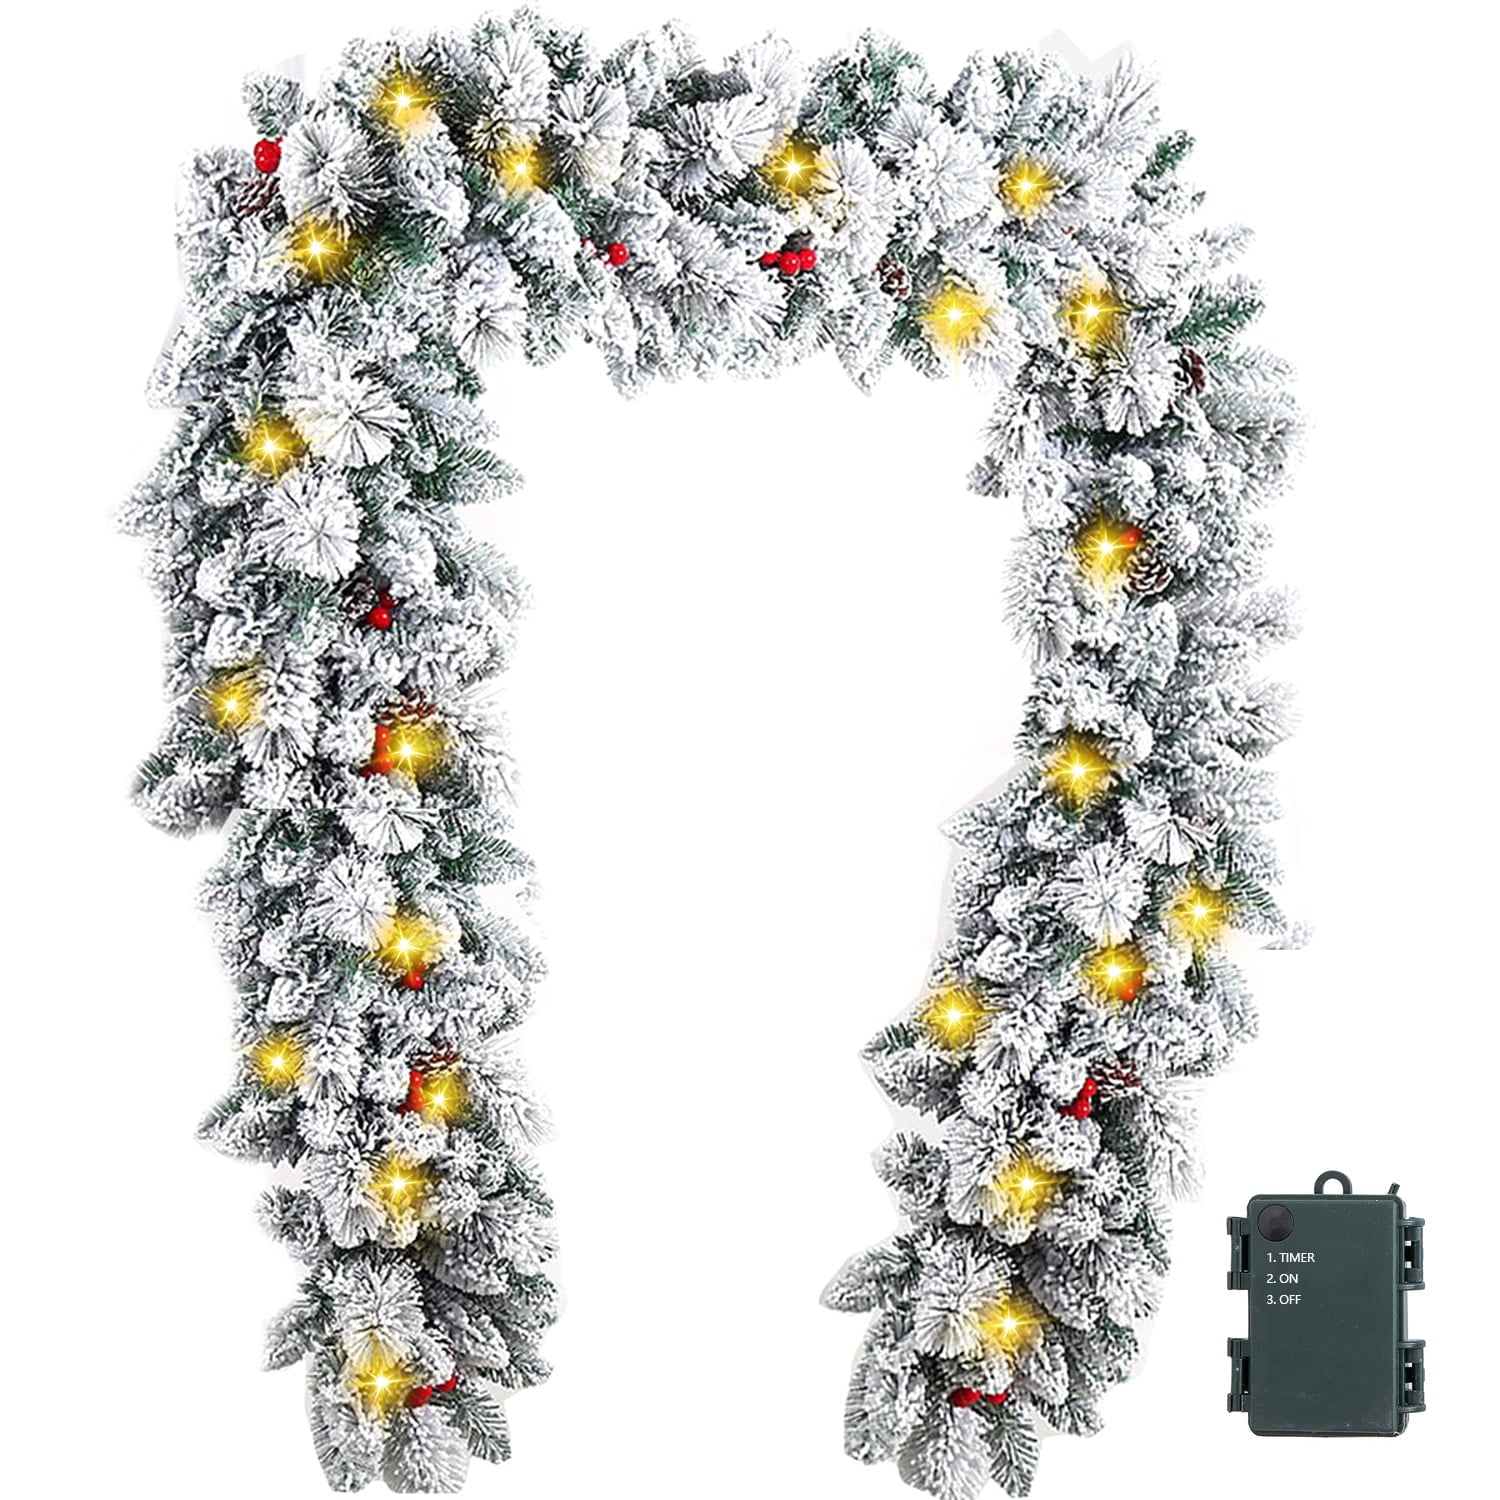 Melliful 9 ft Pre-Lit Christmas Garland, Melliful Decorated Garland with Lights Battery, Pine Mantle Garland for Outdoor Indoor Fireplace Mantel Door Railing Christmas Tree Xmas Holiday